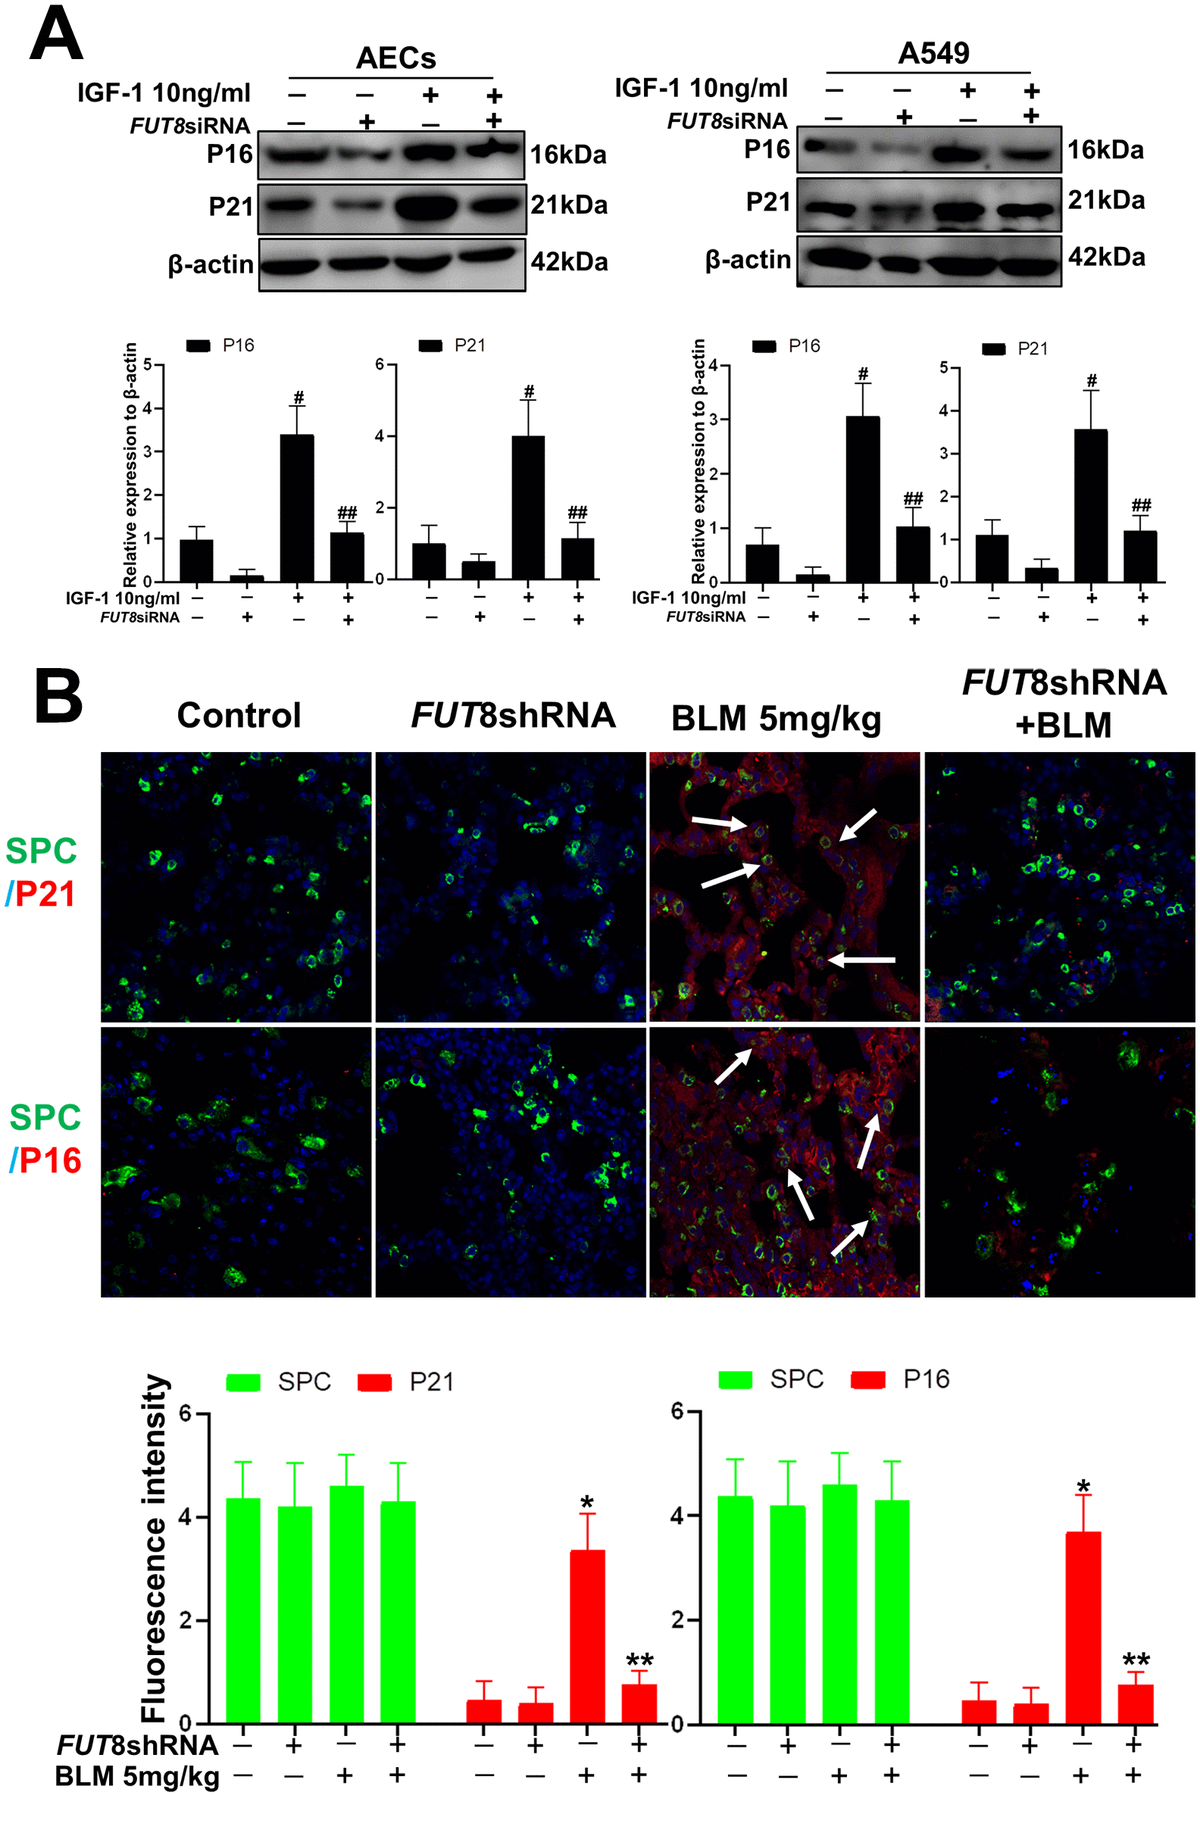 AEC senescence was inhibited upon FUT8 knockdown in vitro and vivo. (A) P21 and P16 levels were assessed using western blotting analyses in different groups. (B) Representative immunofluorescence images of dual staining for SPC (green) and P21 (red), SPC (green) and P16 (red) are shown in vivo (original magnification, 200×). Data are shown as the mean ± SEM, n ≥ 3 per group. #P P P P FUT8 siRNA+ IGF1 group with the IGF1 group. *indicates the comparison of the control group with the BLM group; **indicates the comparison of the FUT8shRNA+ BLM group with the BLM group. One-way ANOVA followed by Dunnett’s Multiple Comparison Test.